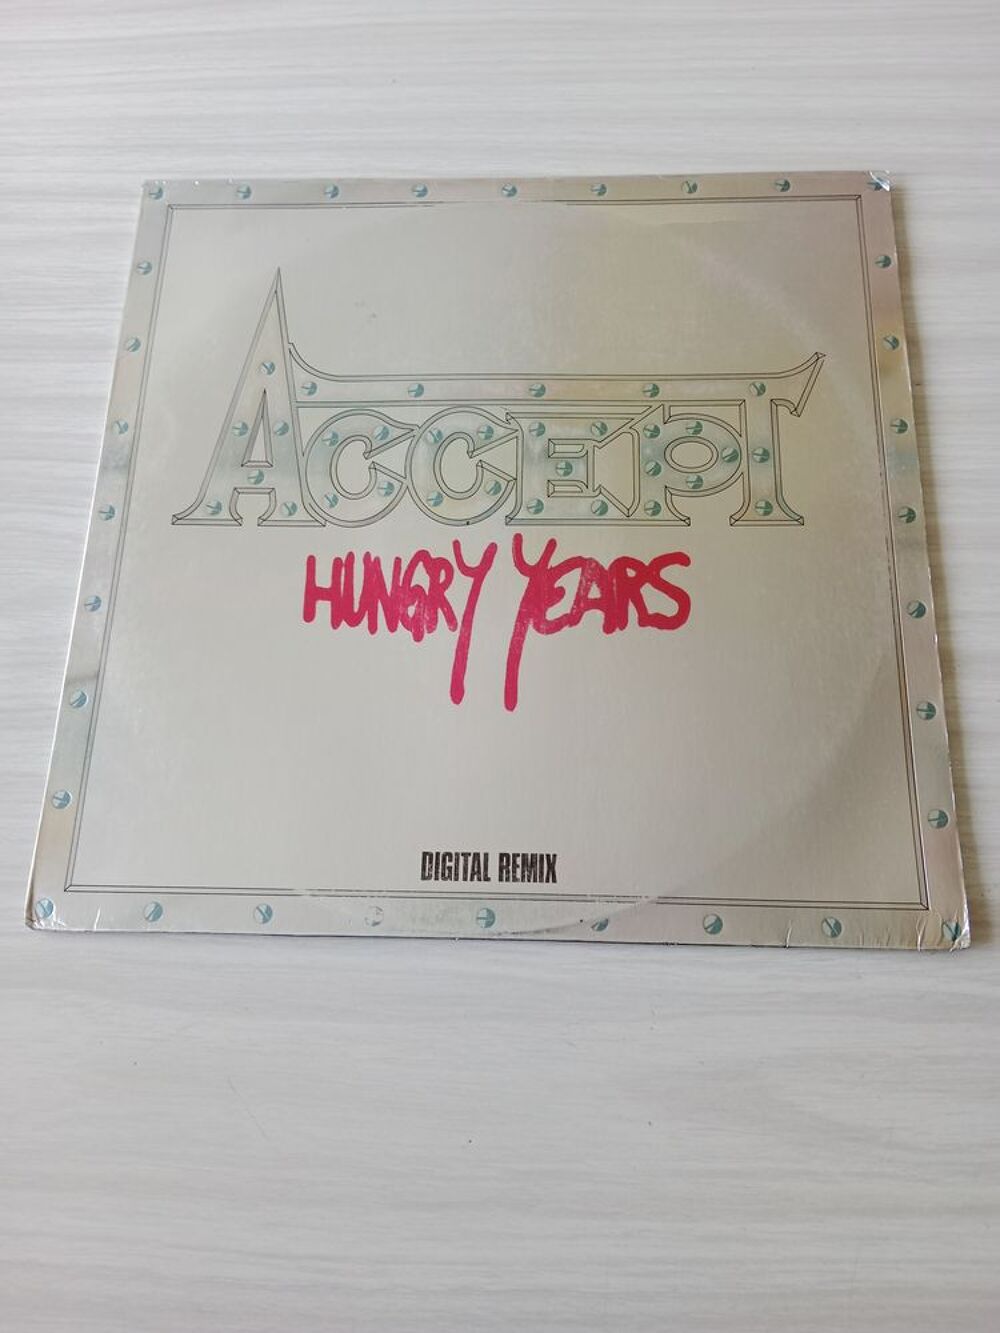 33 TOURS ACCEPT Hungry years - HARD ROCK CD et vinyles